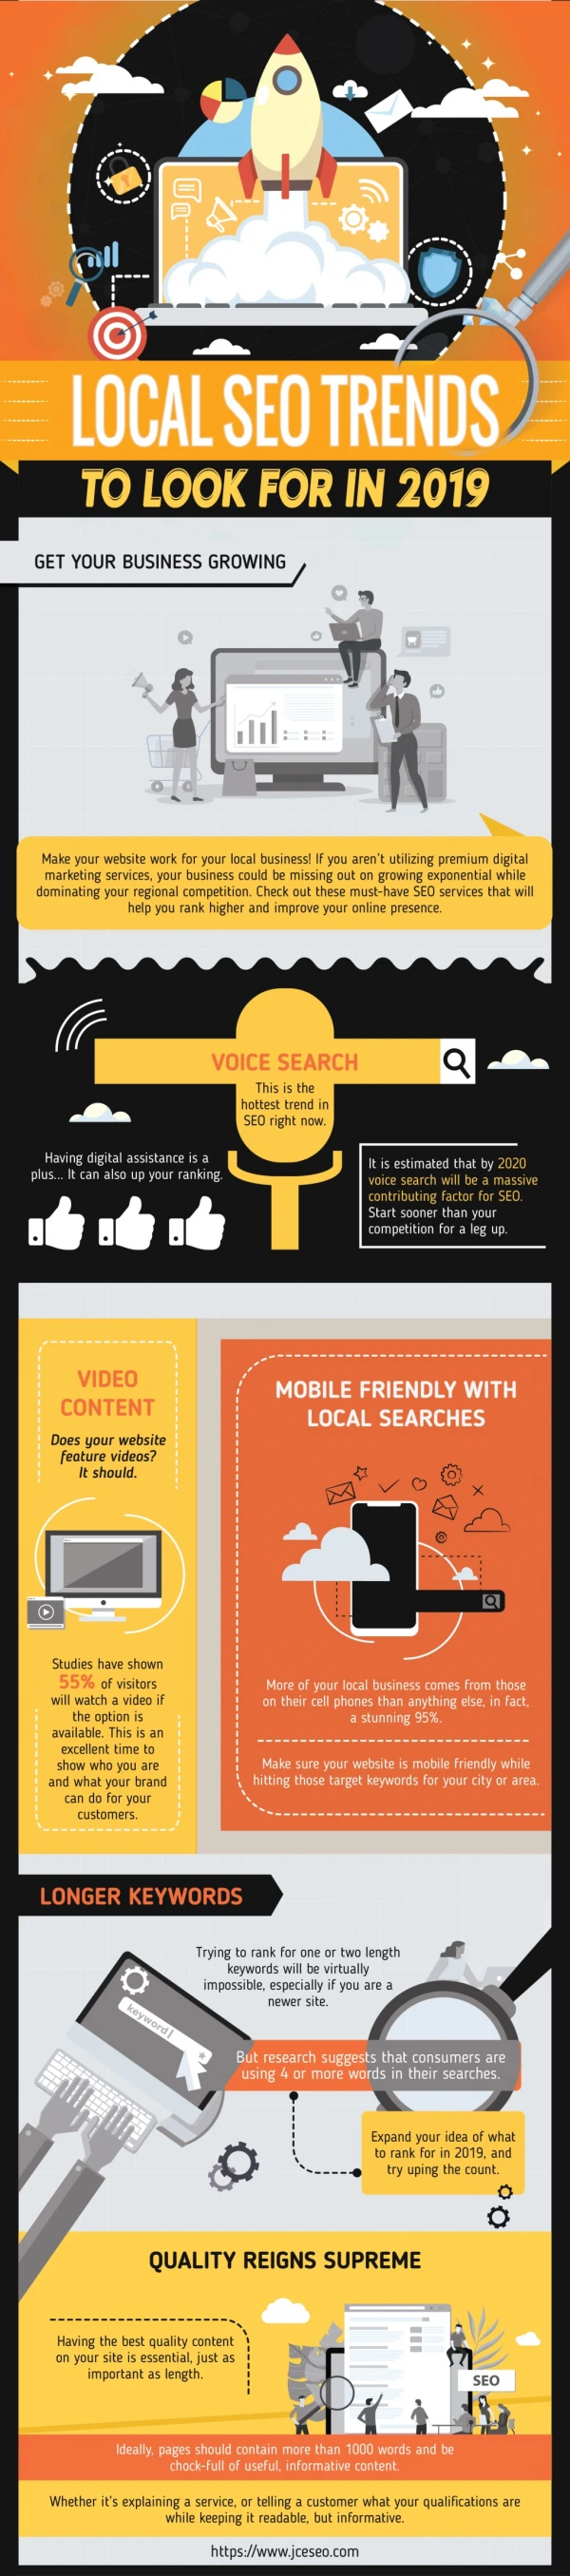 Local SEO Trends To Look For in 2019